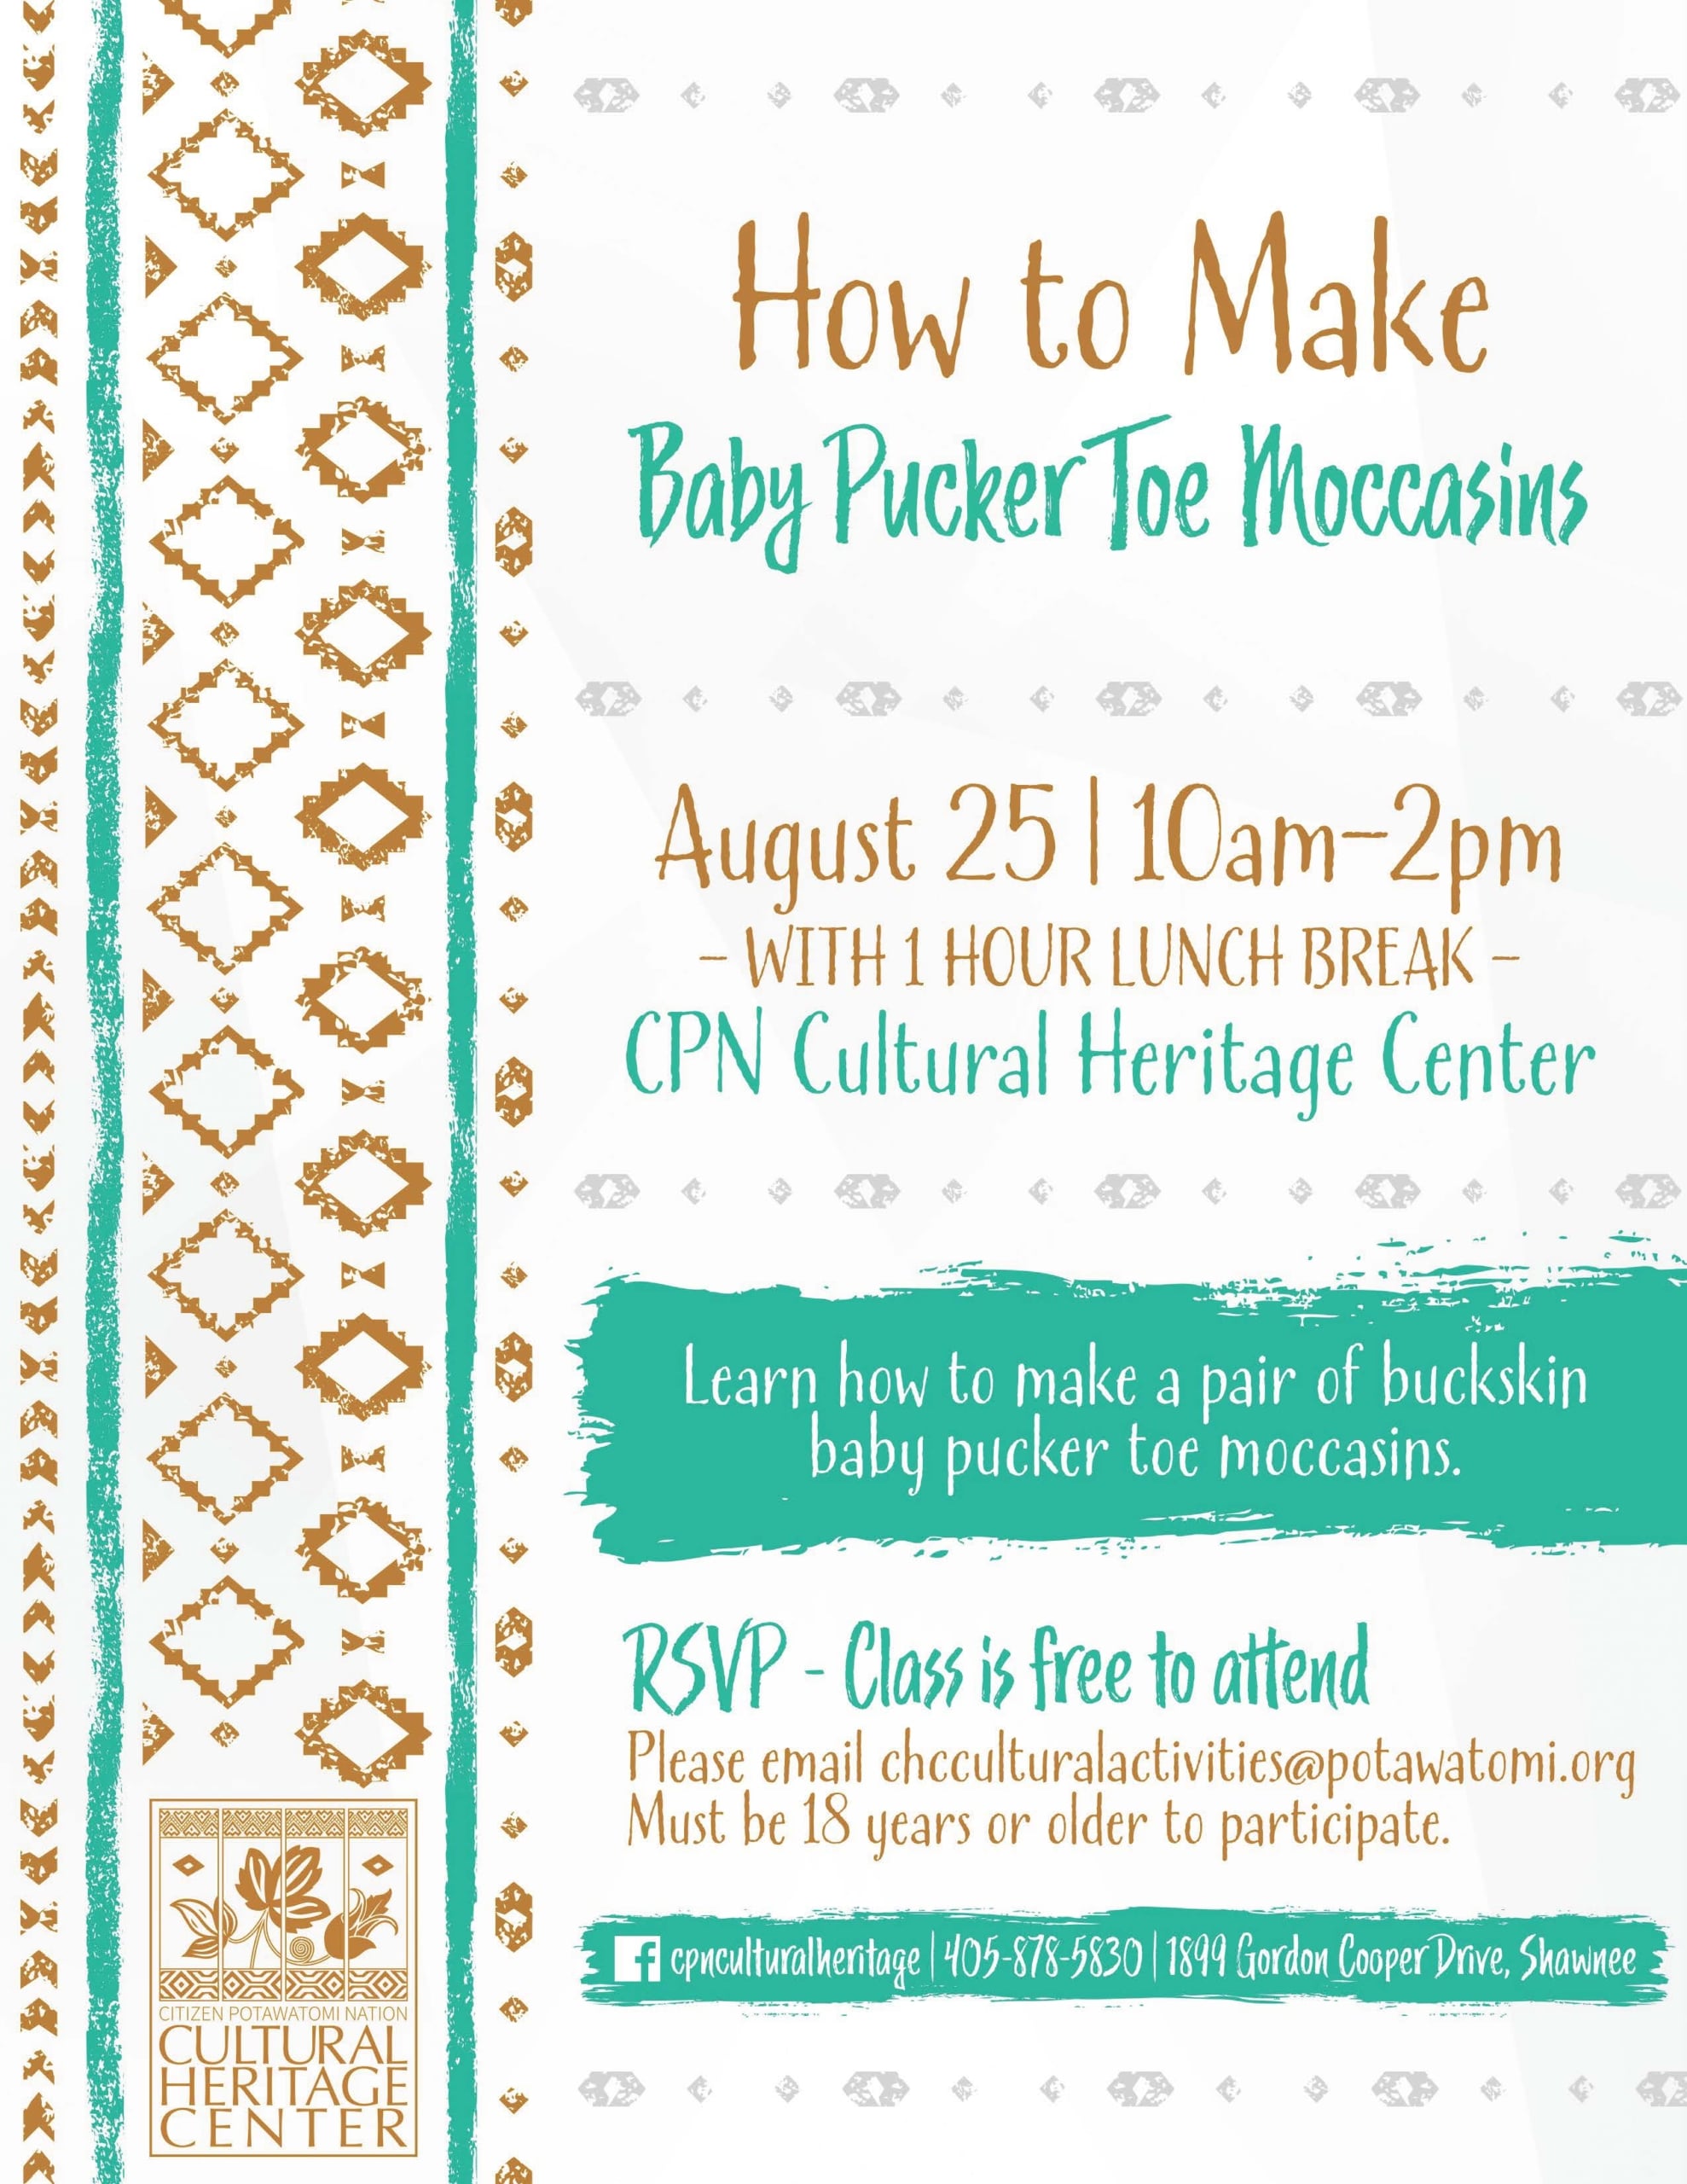 Pucker Toe Moccasins Class at CPN Cultural Heritage Center